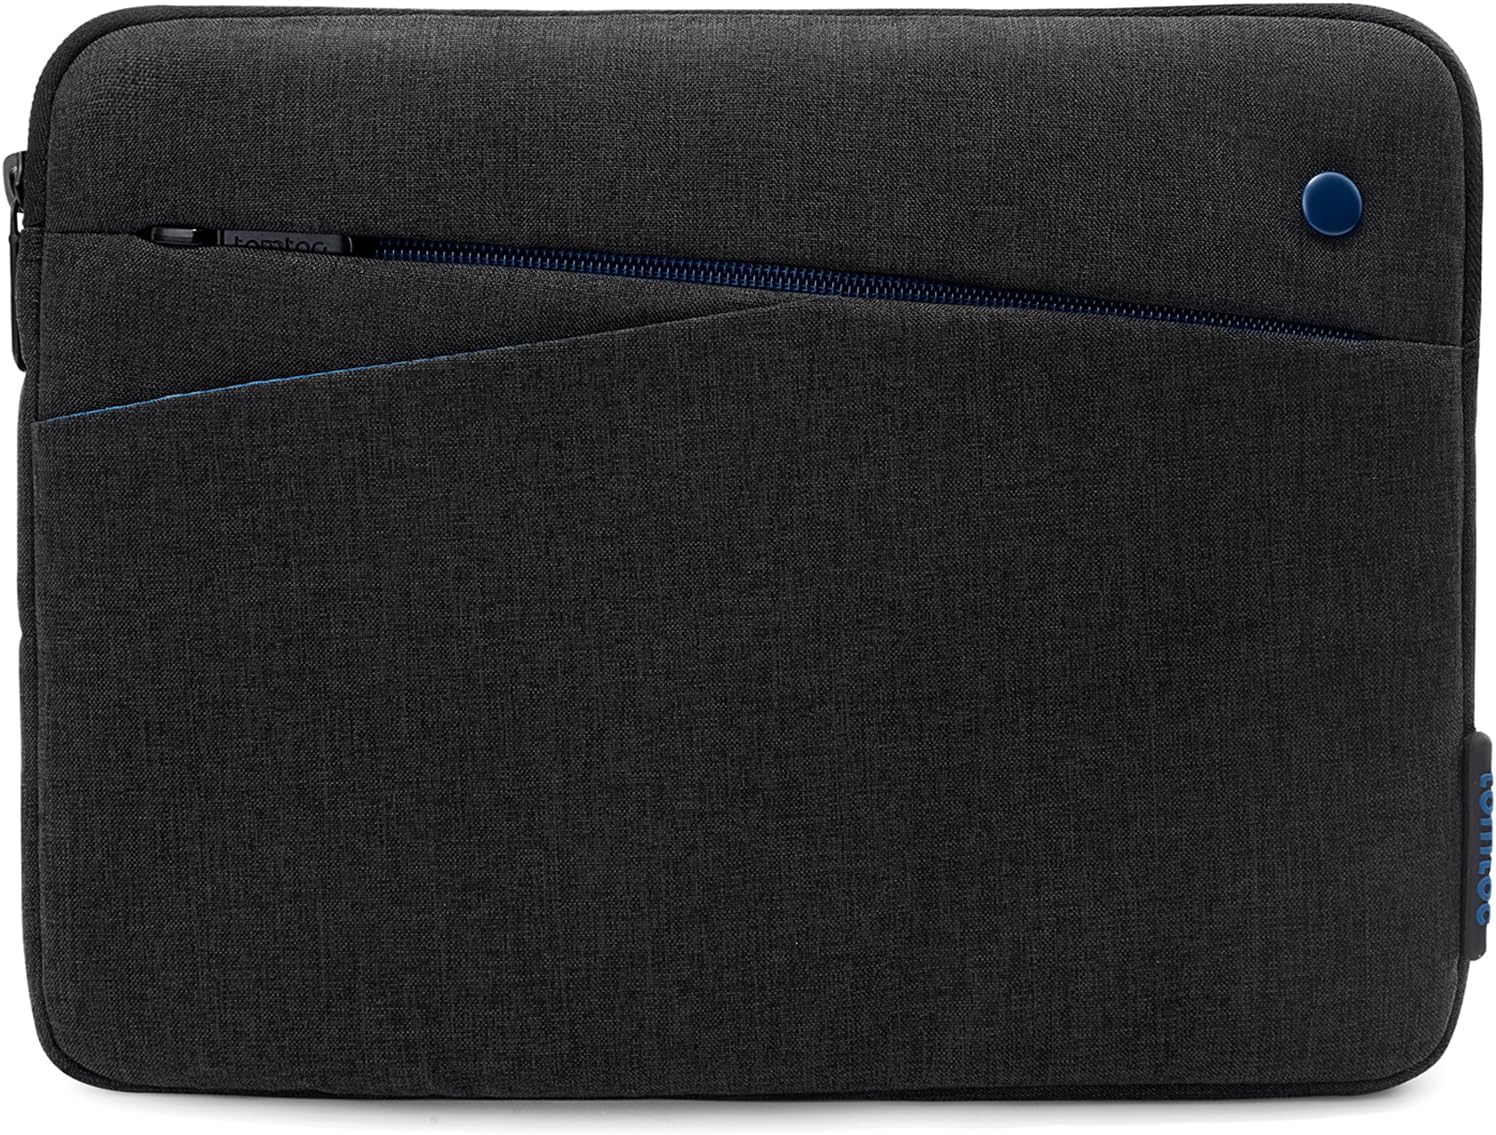 Tomtoc Basic-A18 Tablet Sleeve